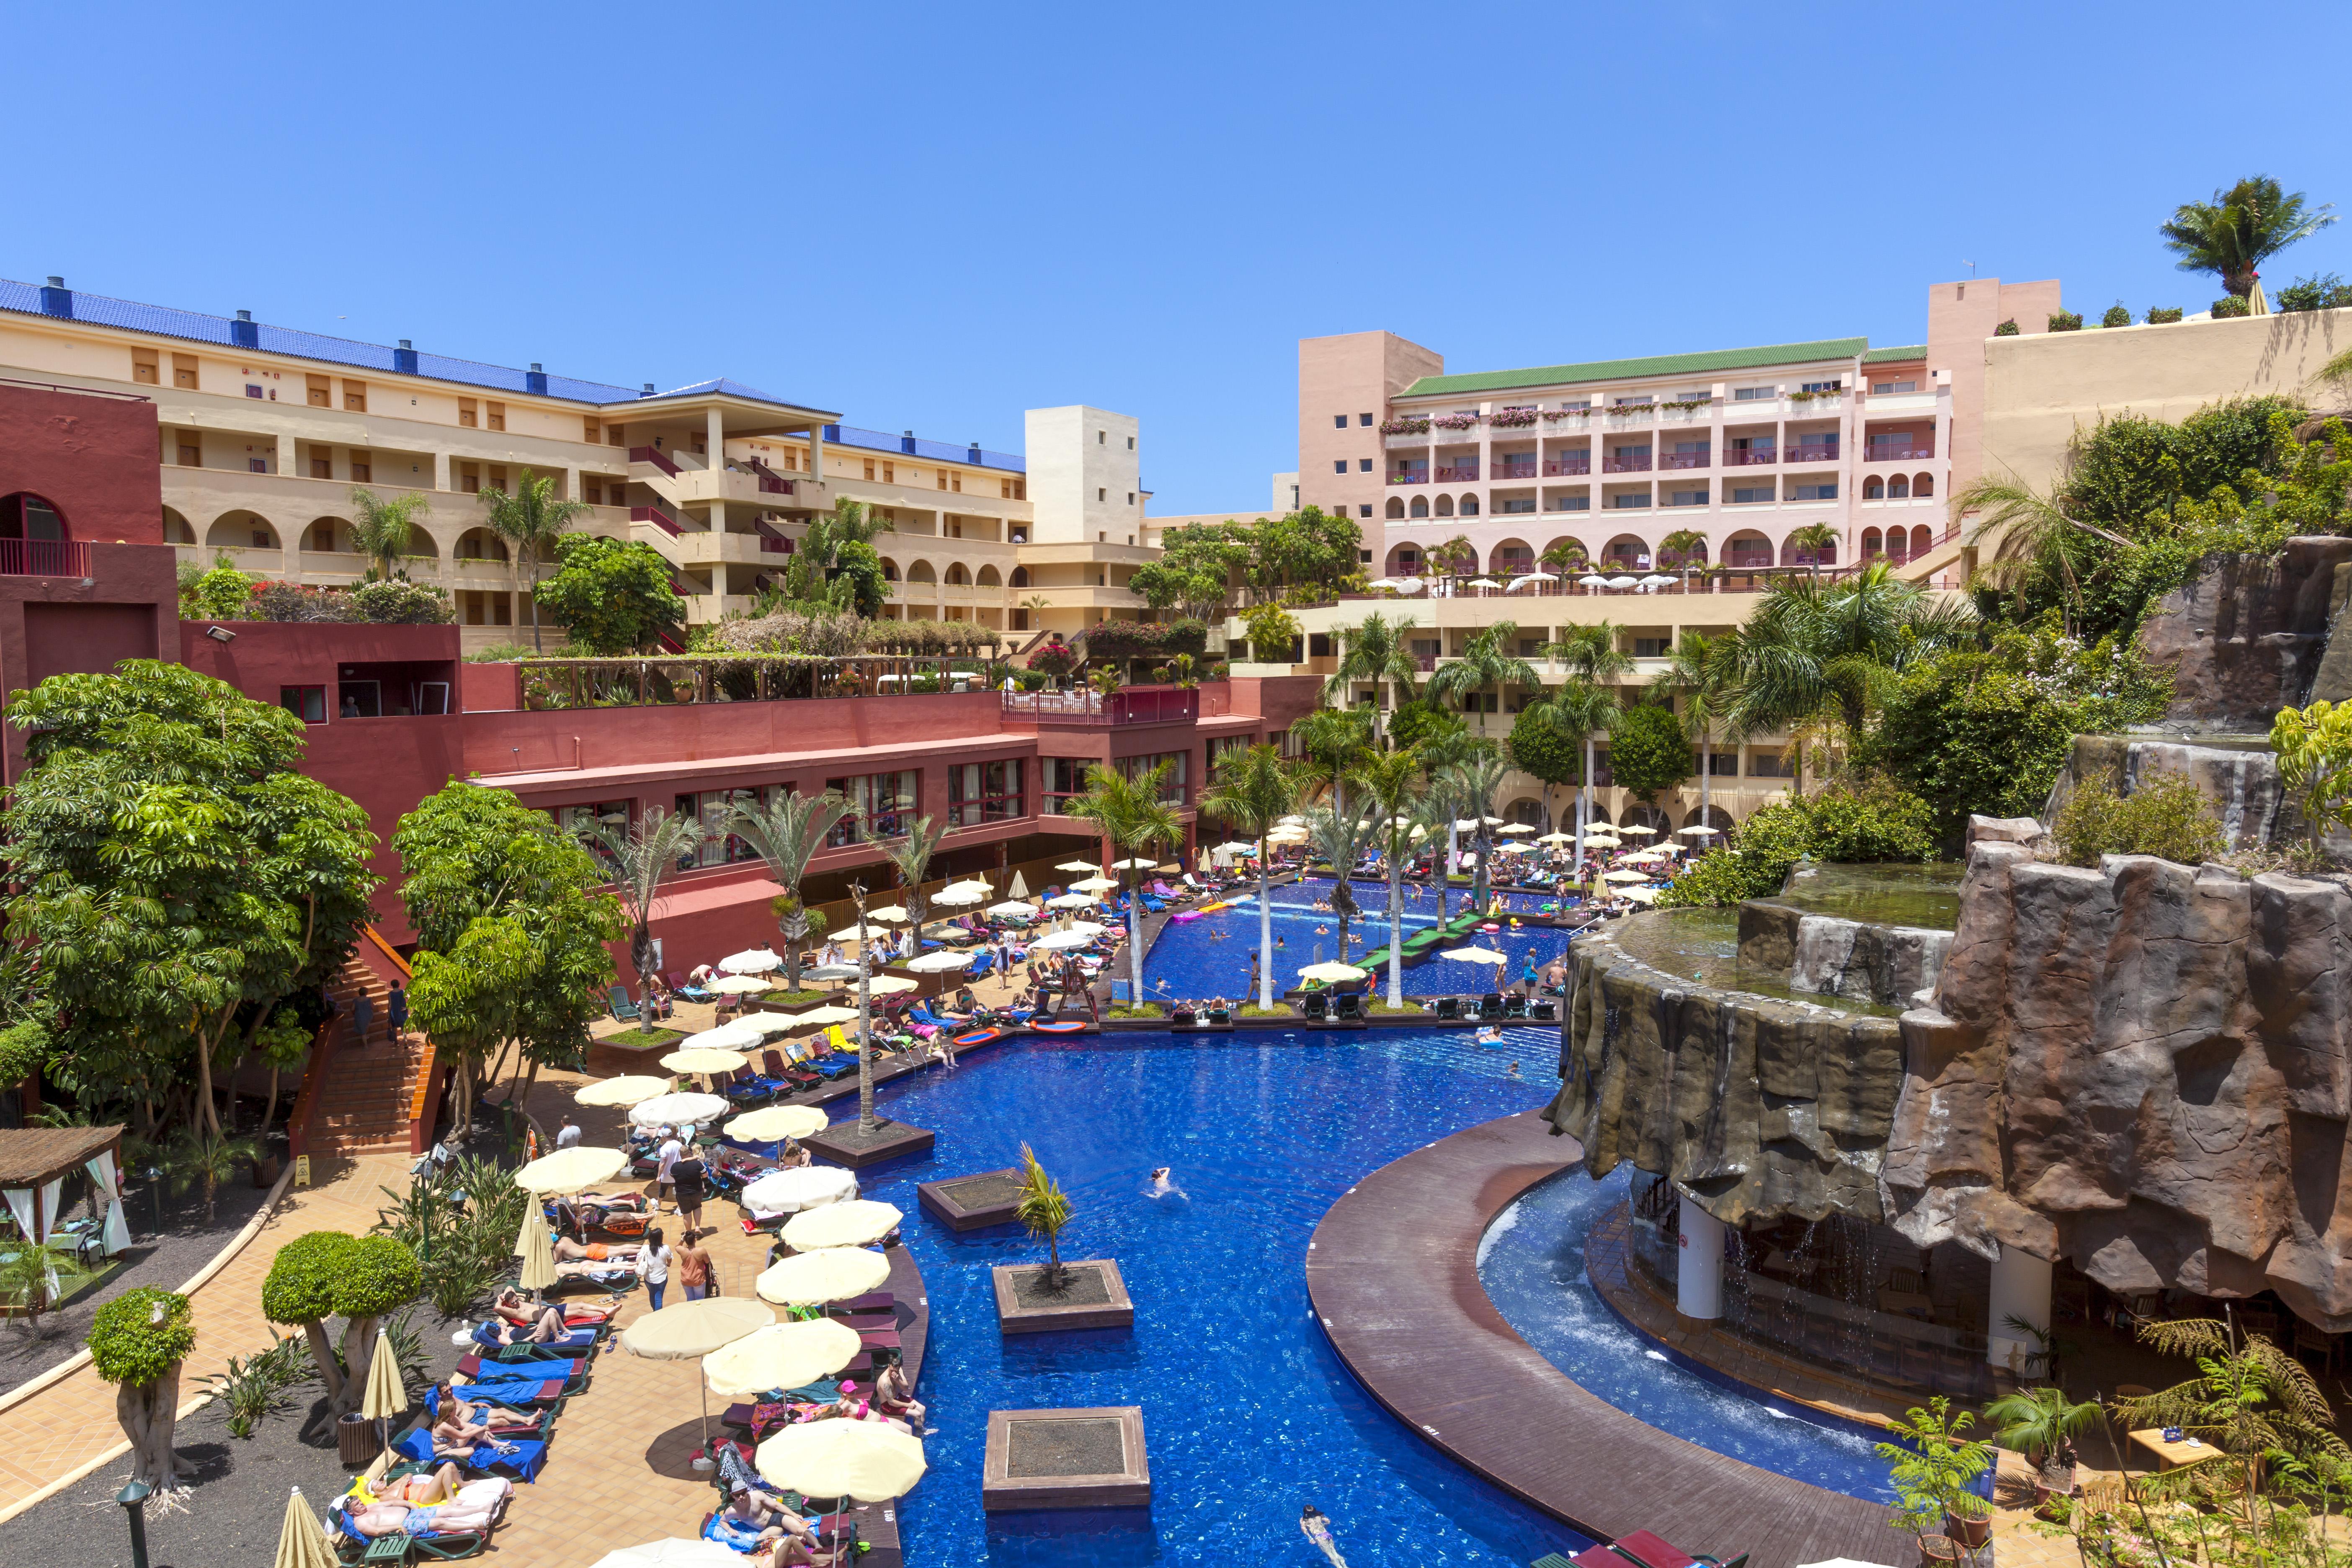 Bahía del Duque - Tenerife, Spain : The Leading Hotels of the World